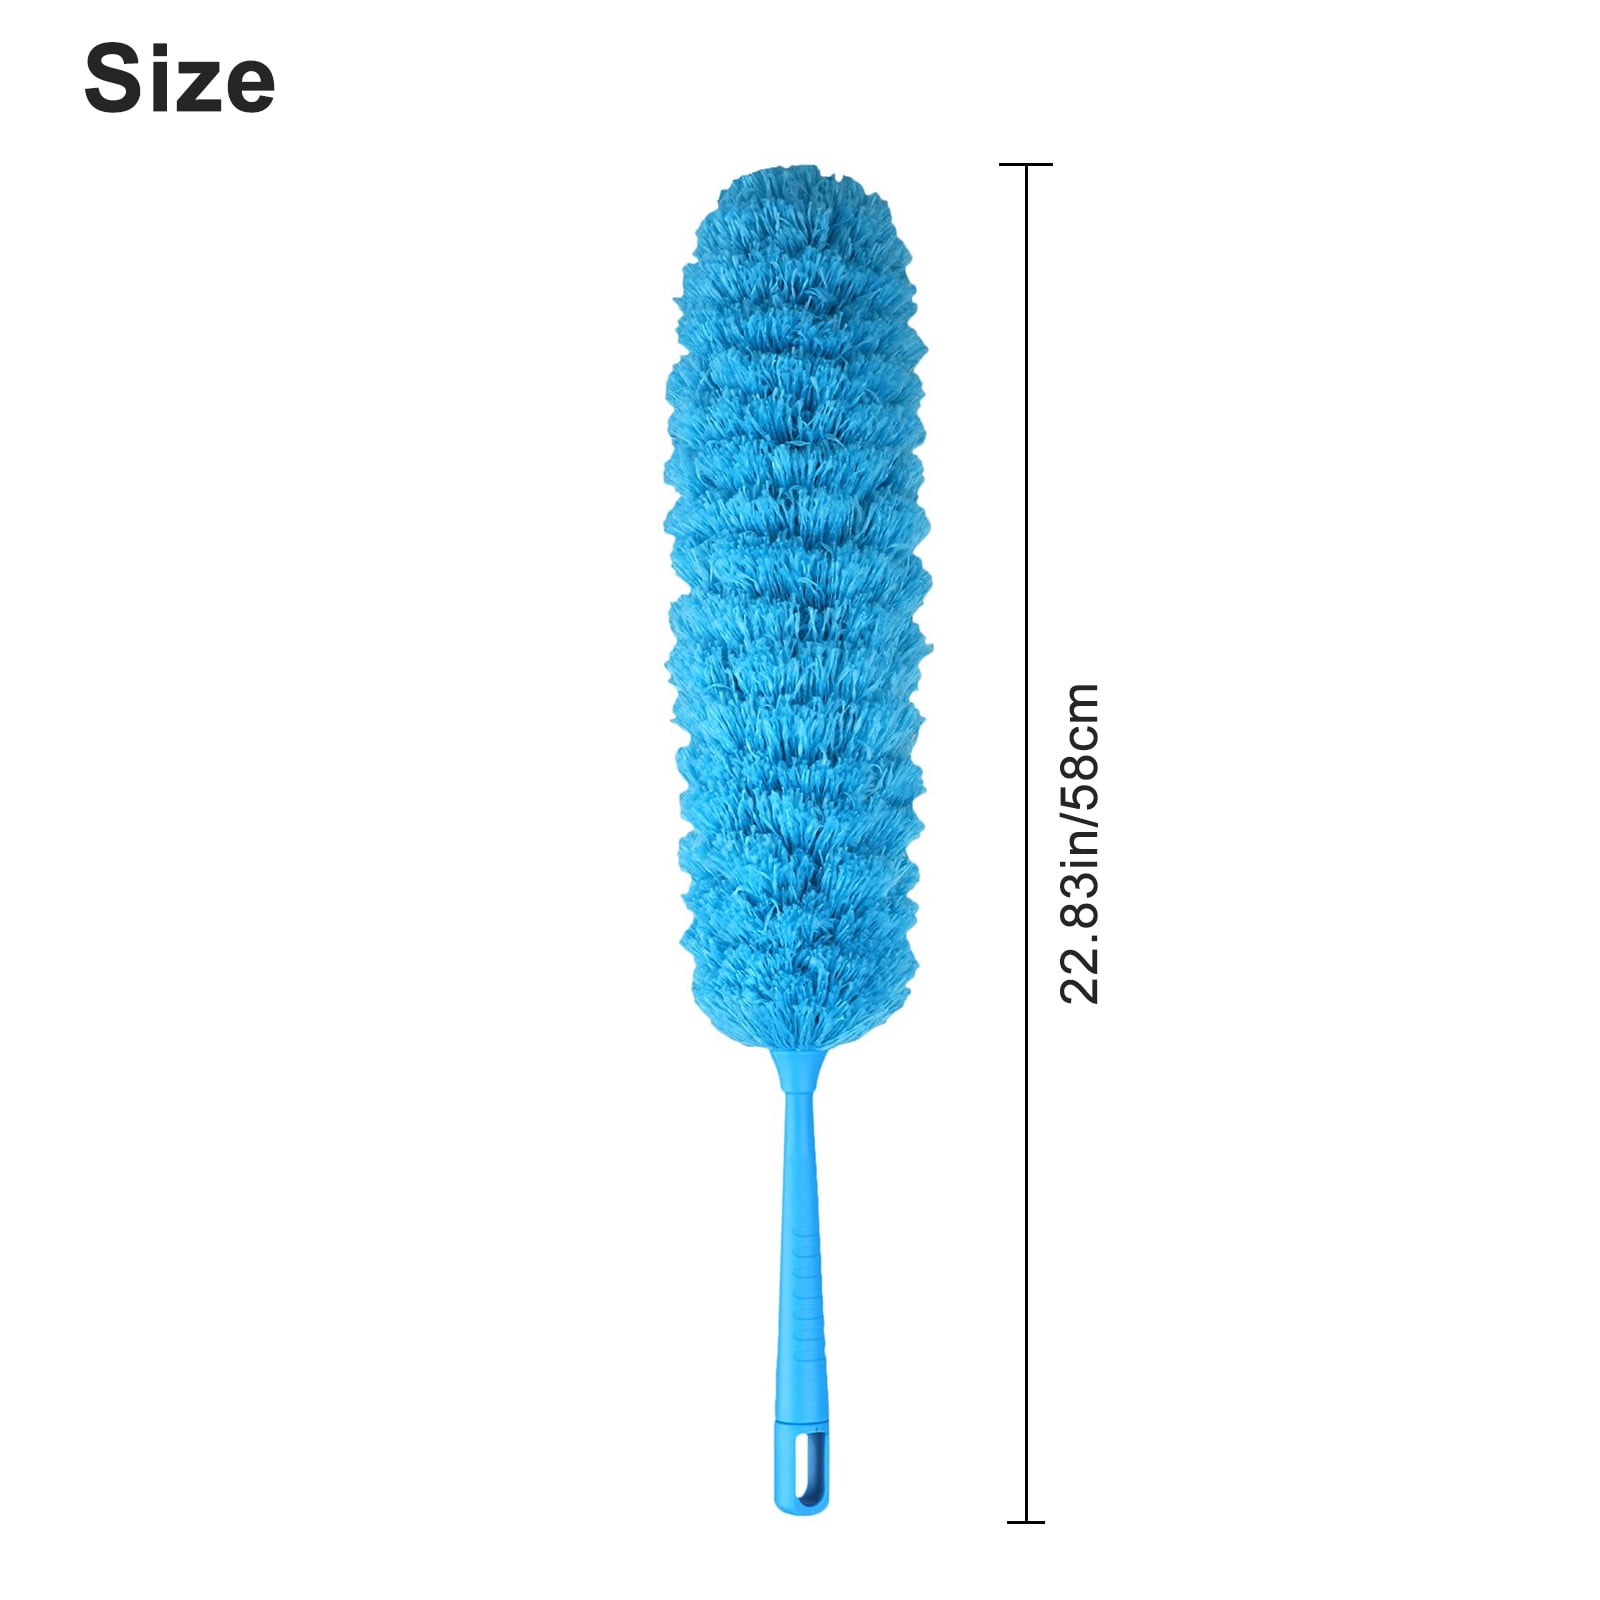 Bendable Soft Microfiber Duster Dusting Brush Household Cleaning Adjustable USA 